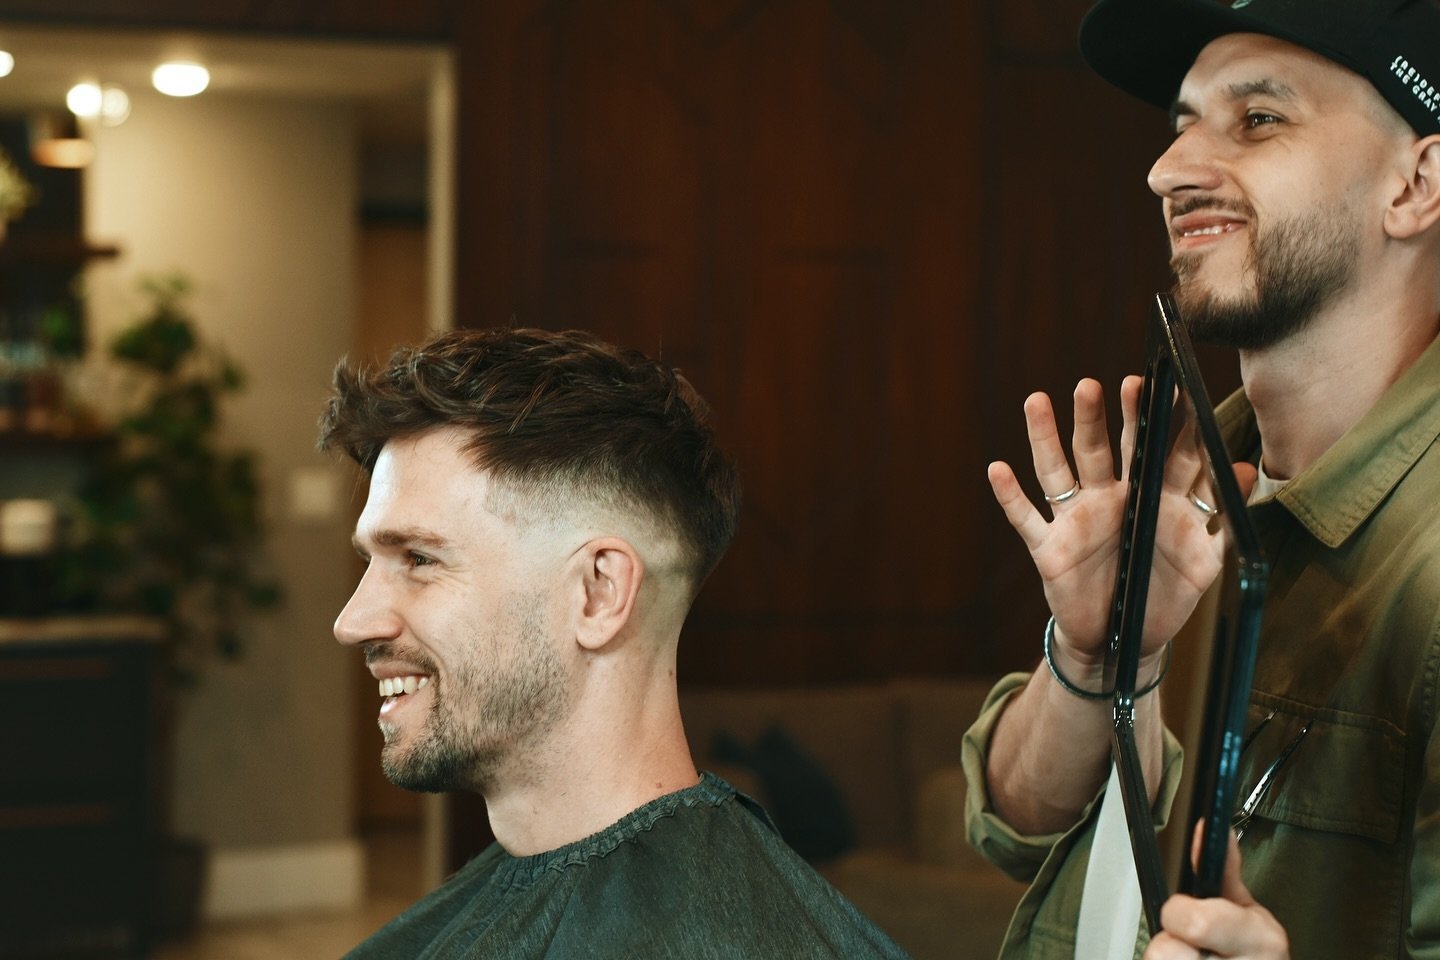 Dishing out confidence, award-winning haircuts and smiles! See you here soon!
.
Click the link in our bio to book complimentary consultation, a grooming session or purchase a gift card
.
Grooming. Experience. Simplified - Establish your Character
.
#